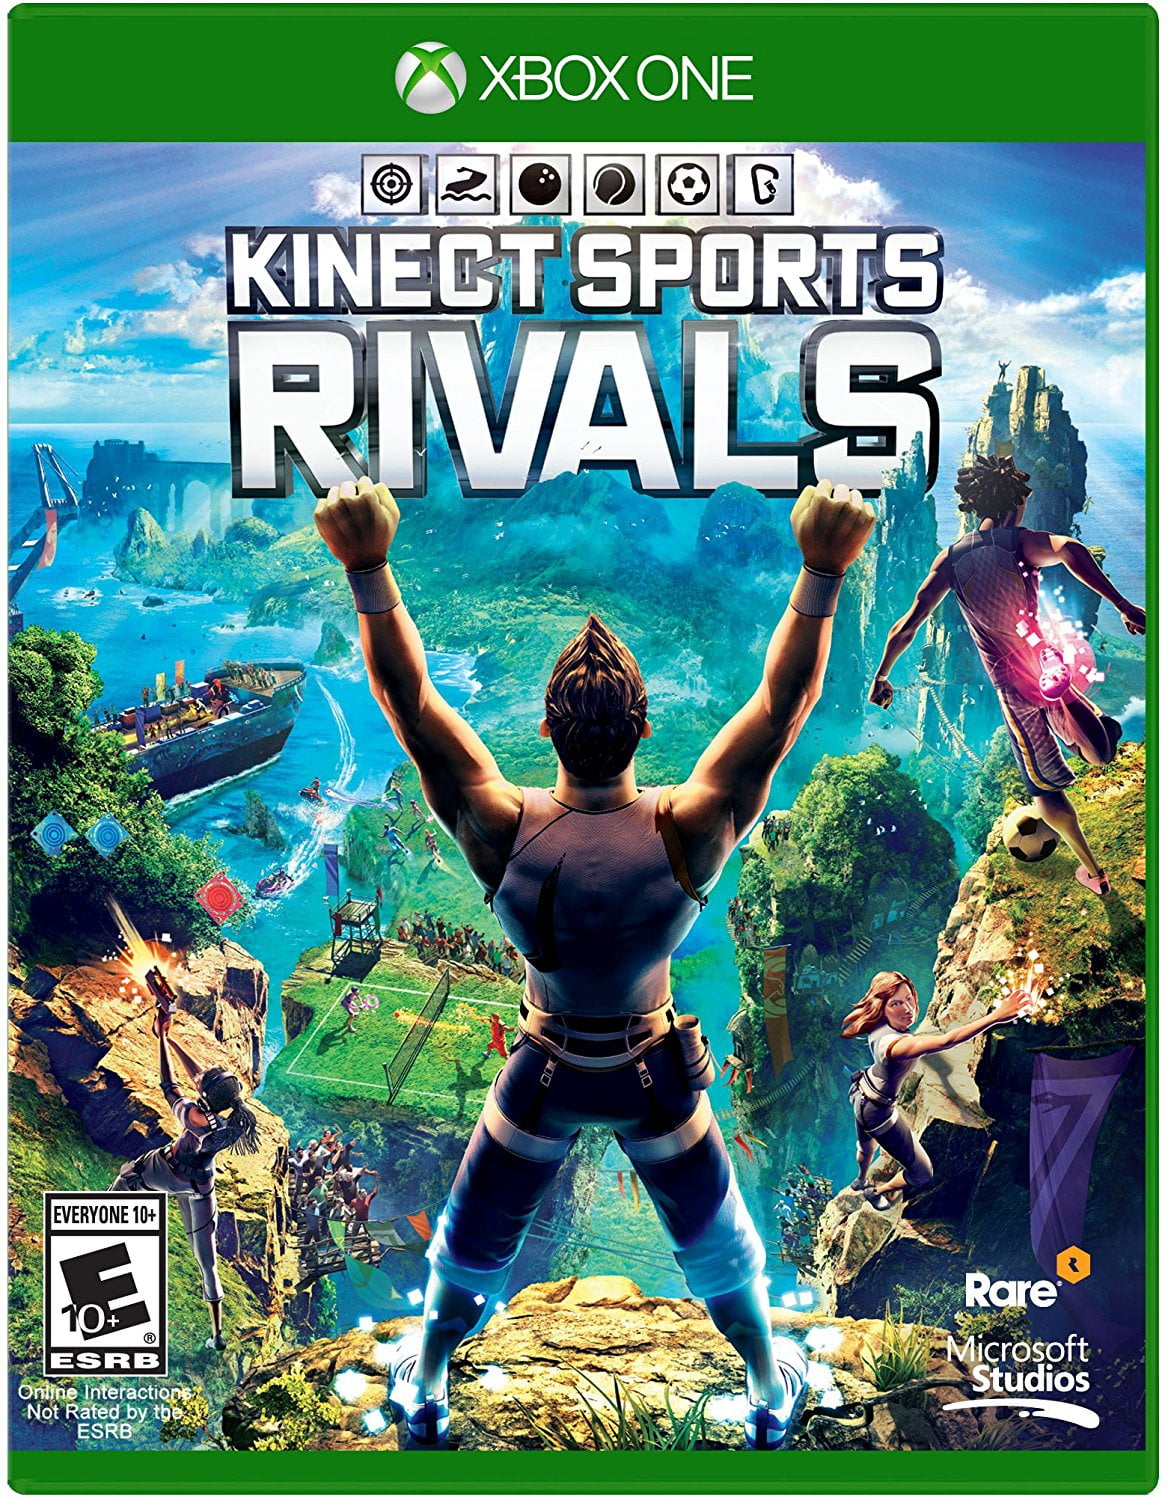 Kinect Sports Rivals - Xbox One (Sports Game) - Walmart.com